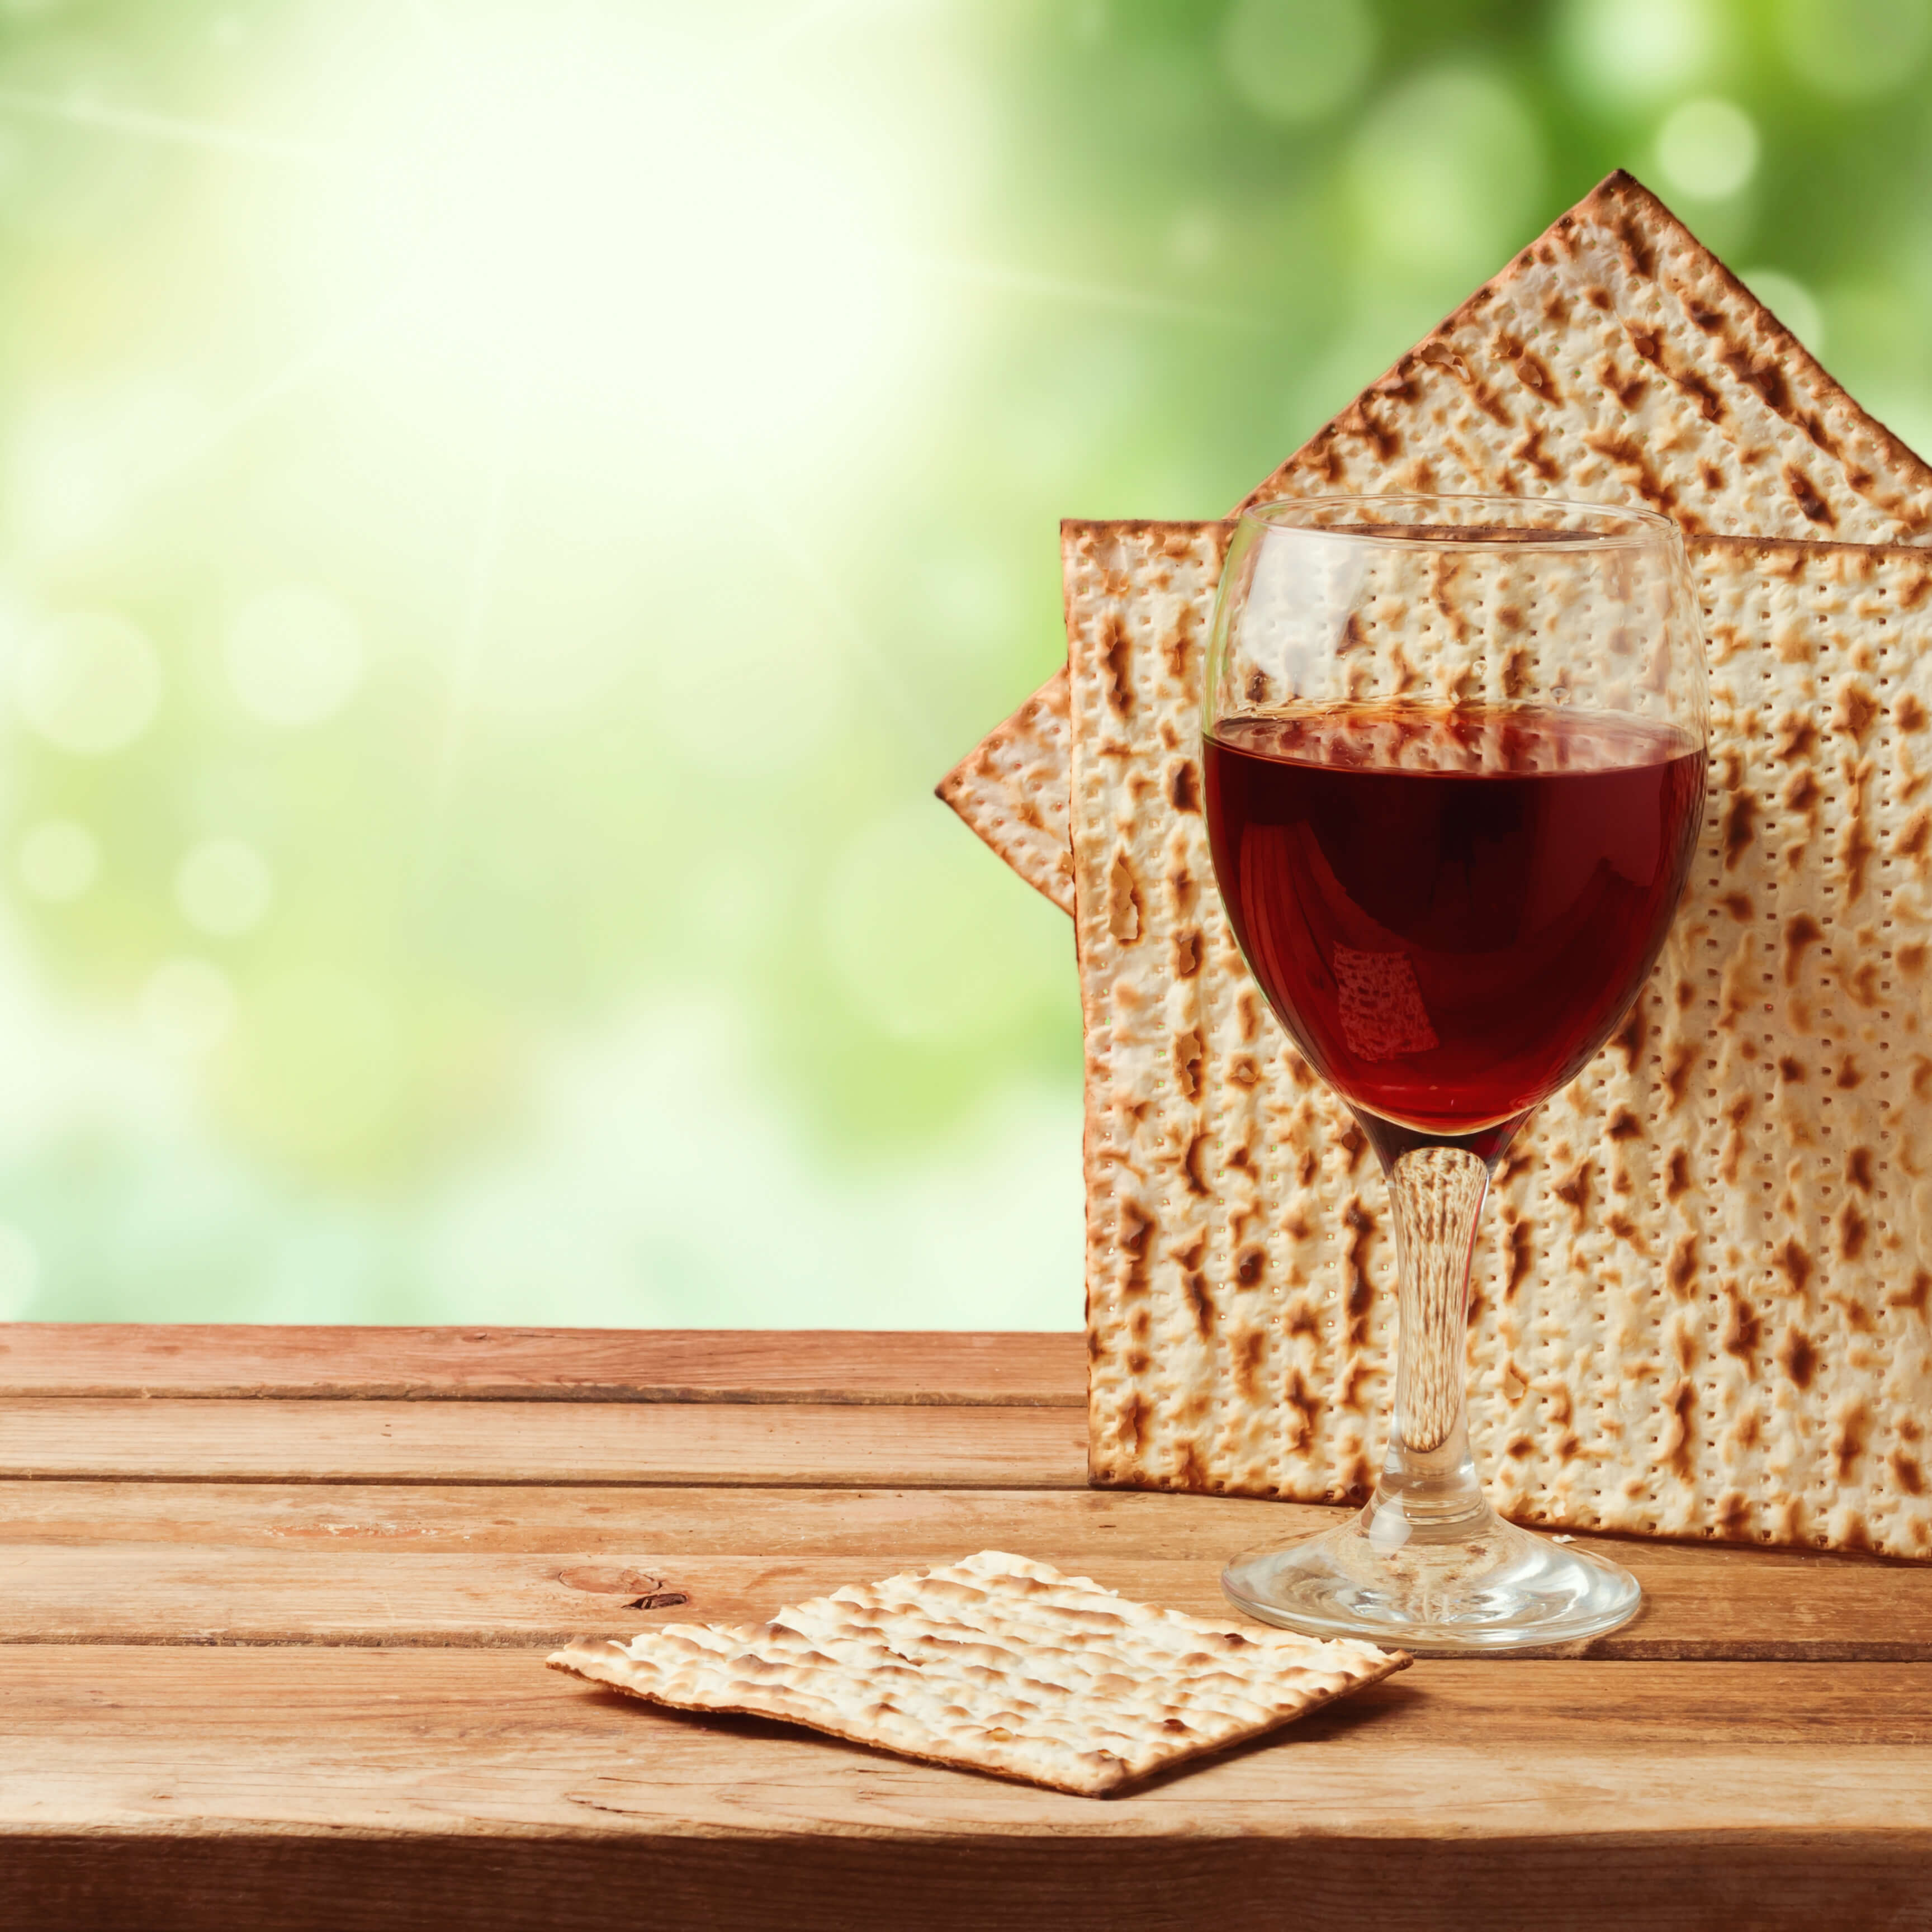 Glass of wine and unleavened bread for passover